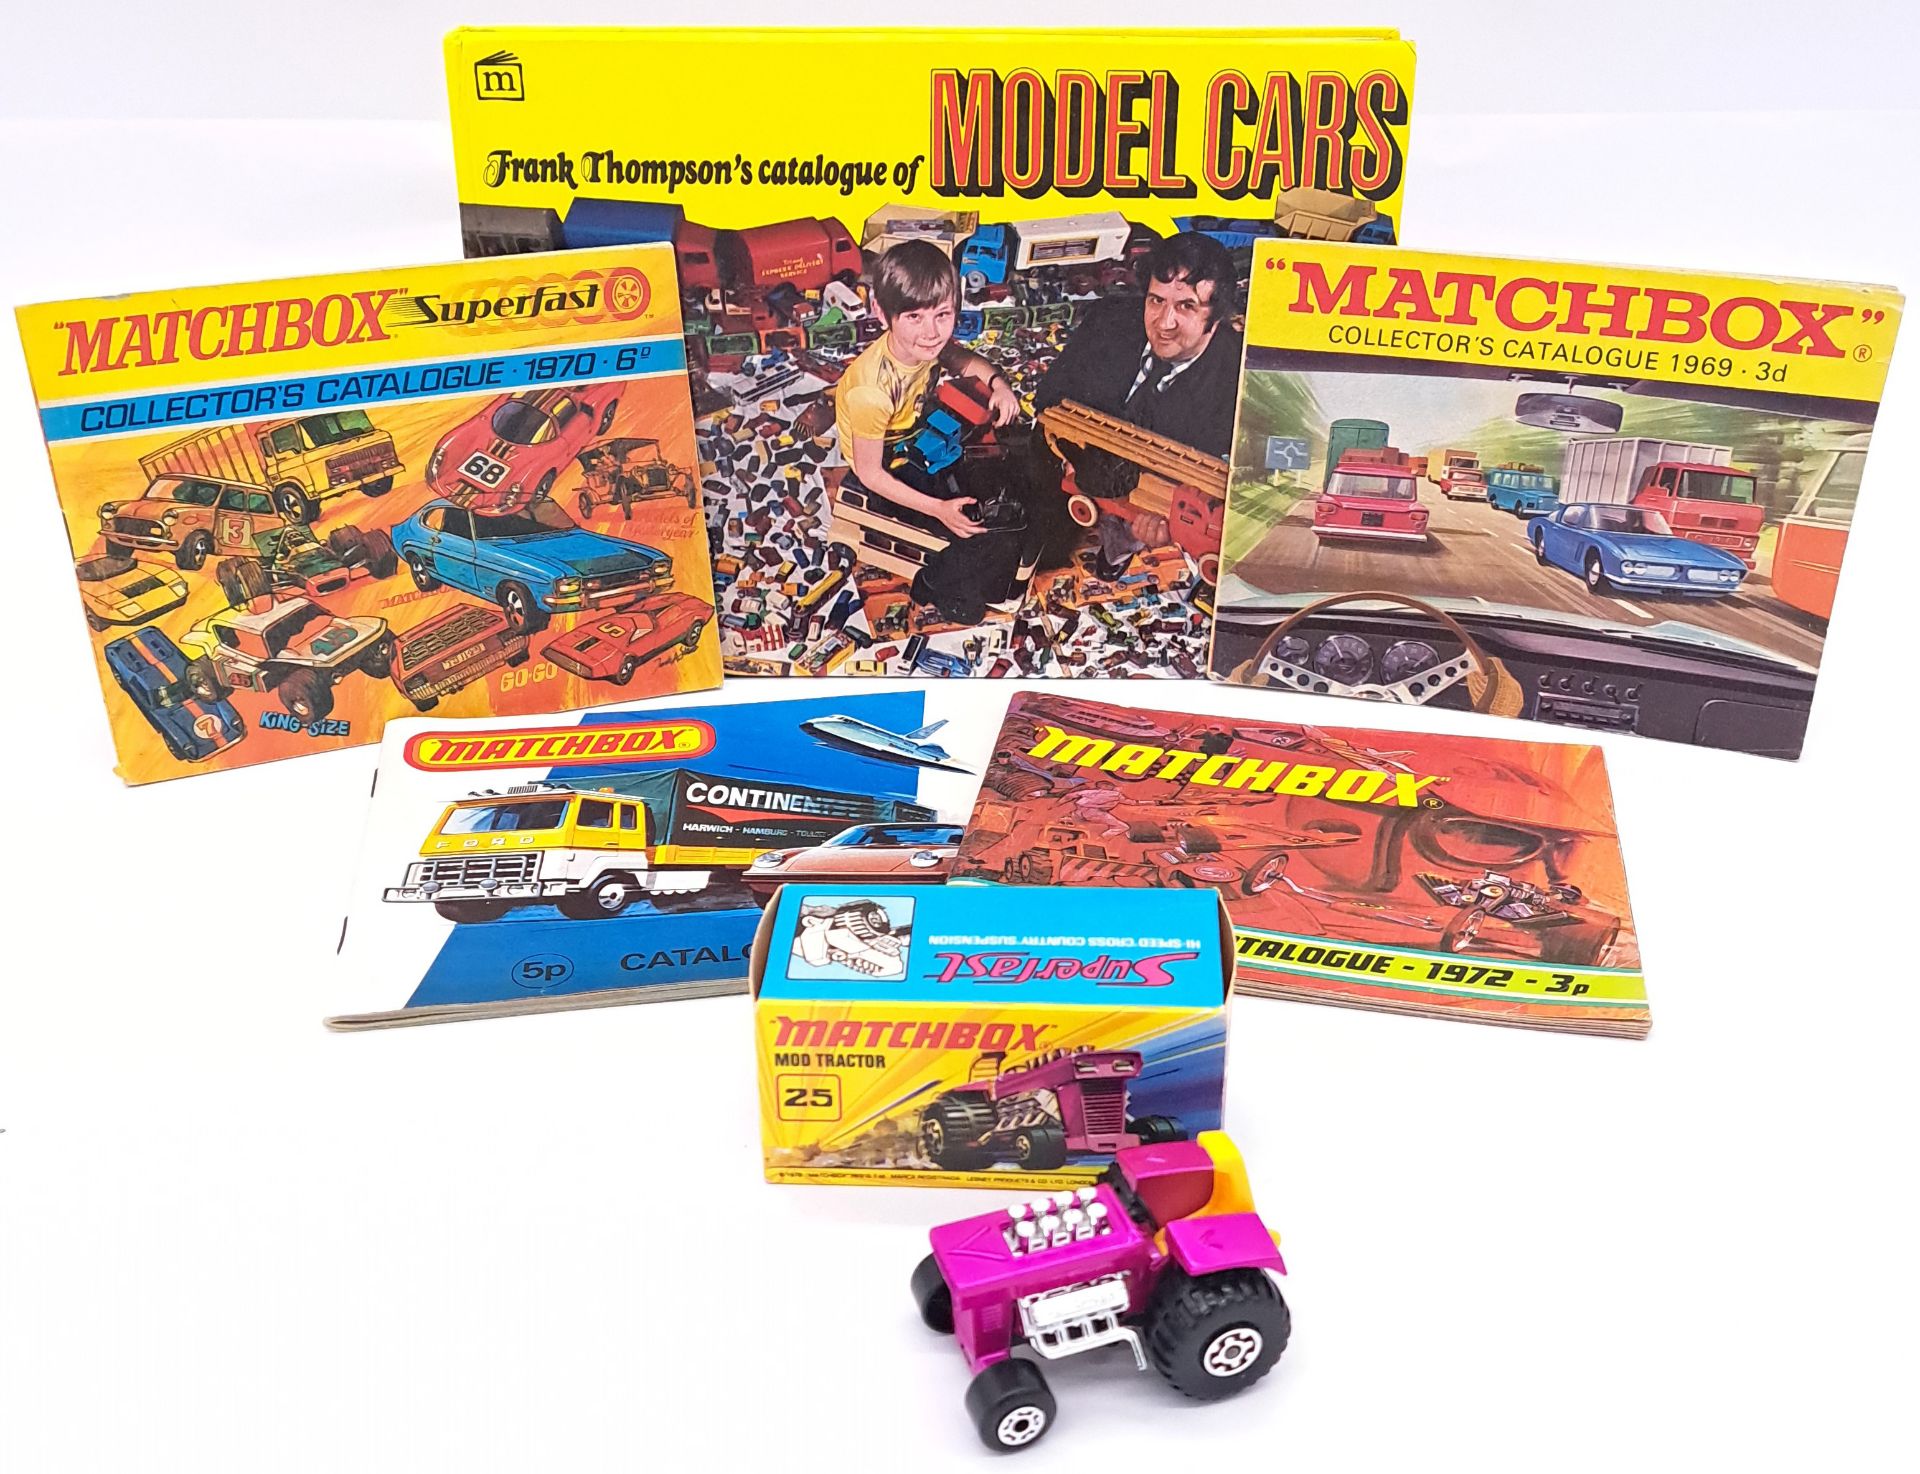 Matchbox "Superfast" a boxed No.25 Mod Tractor 